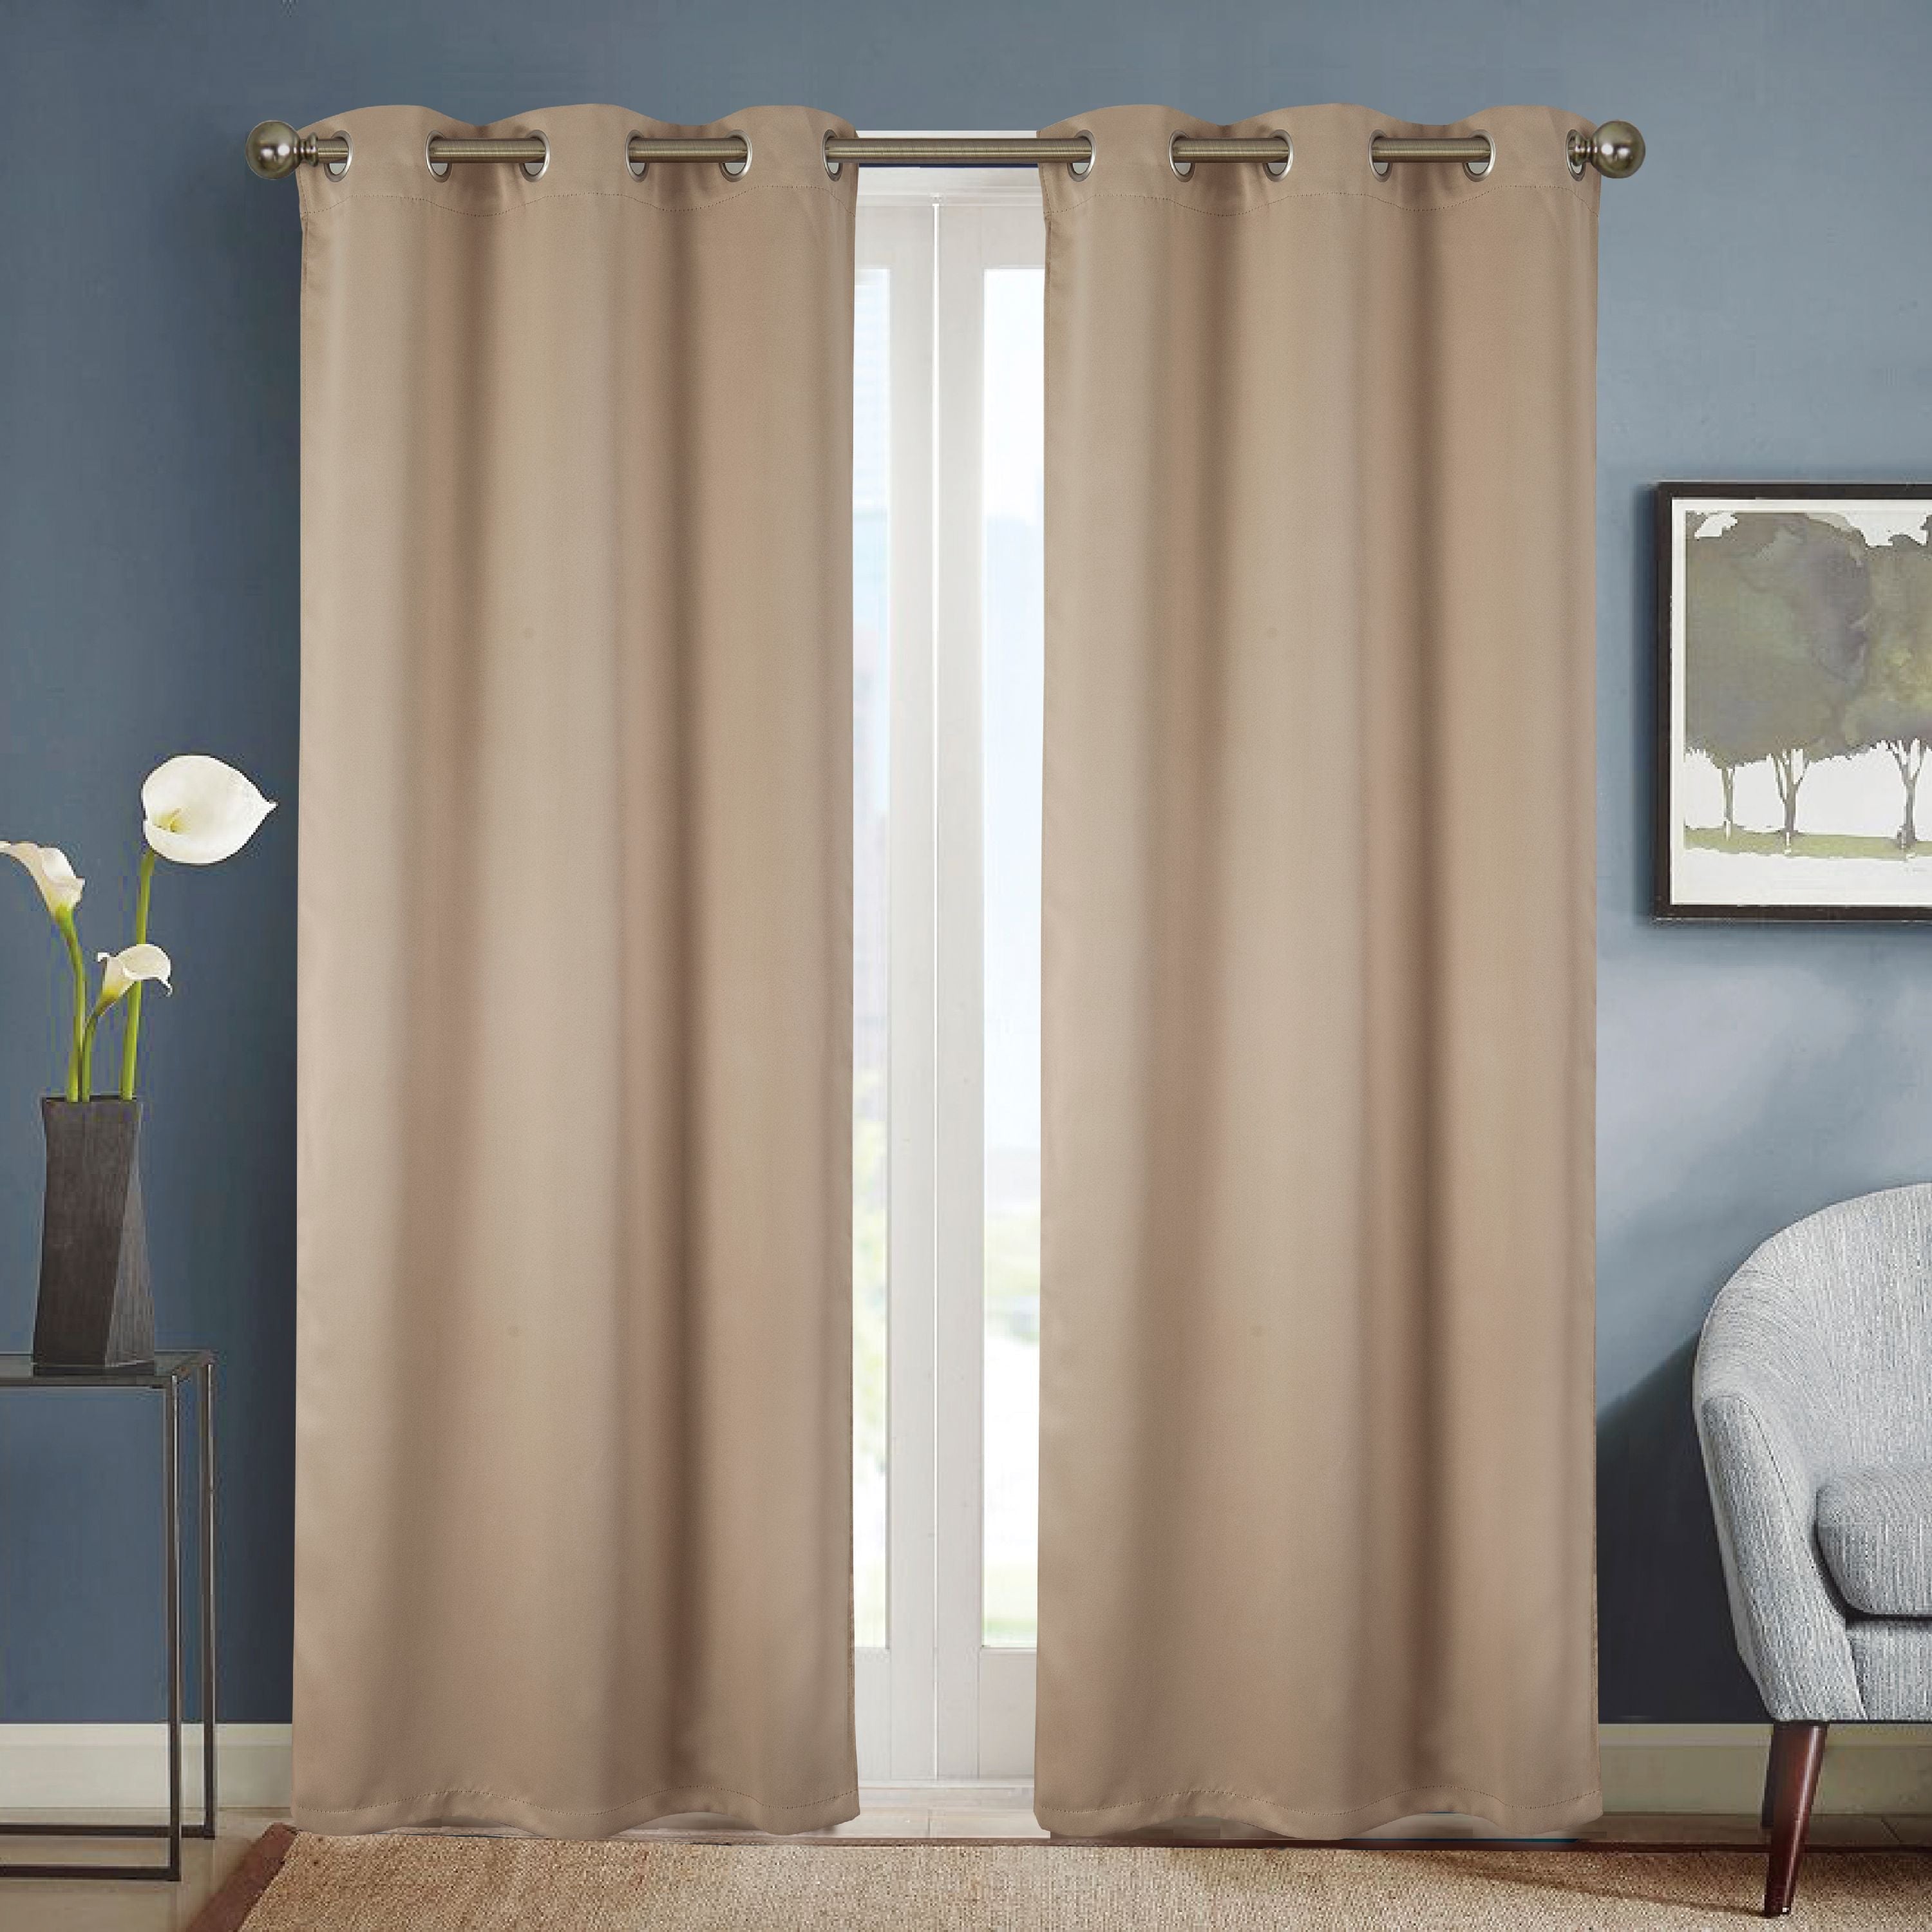 Anchorage Solid Blackout 54 x 63 in. Grommet Single Curtain Panel by Olivia Gray - Linen Universe Co.